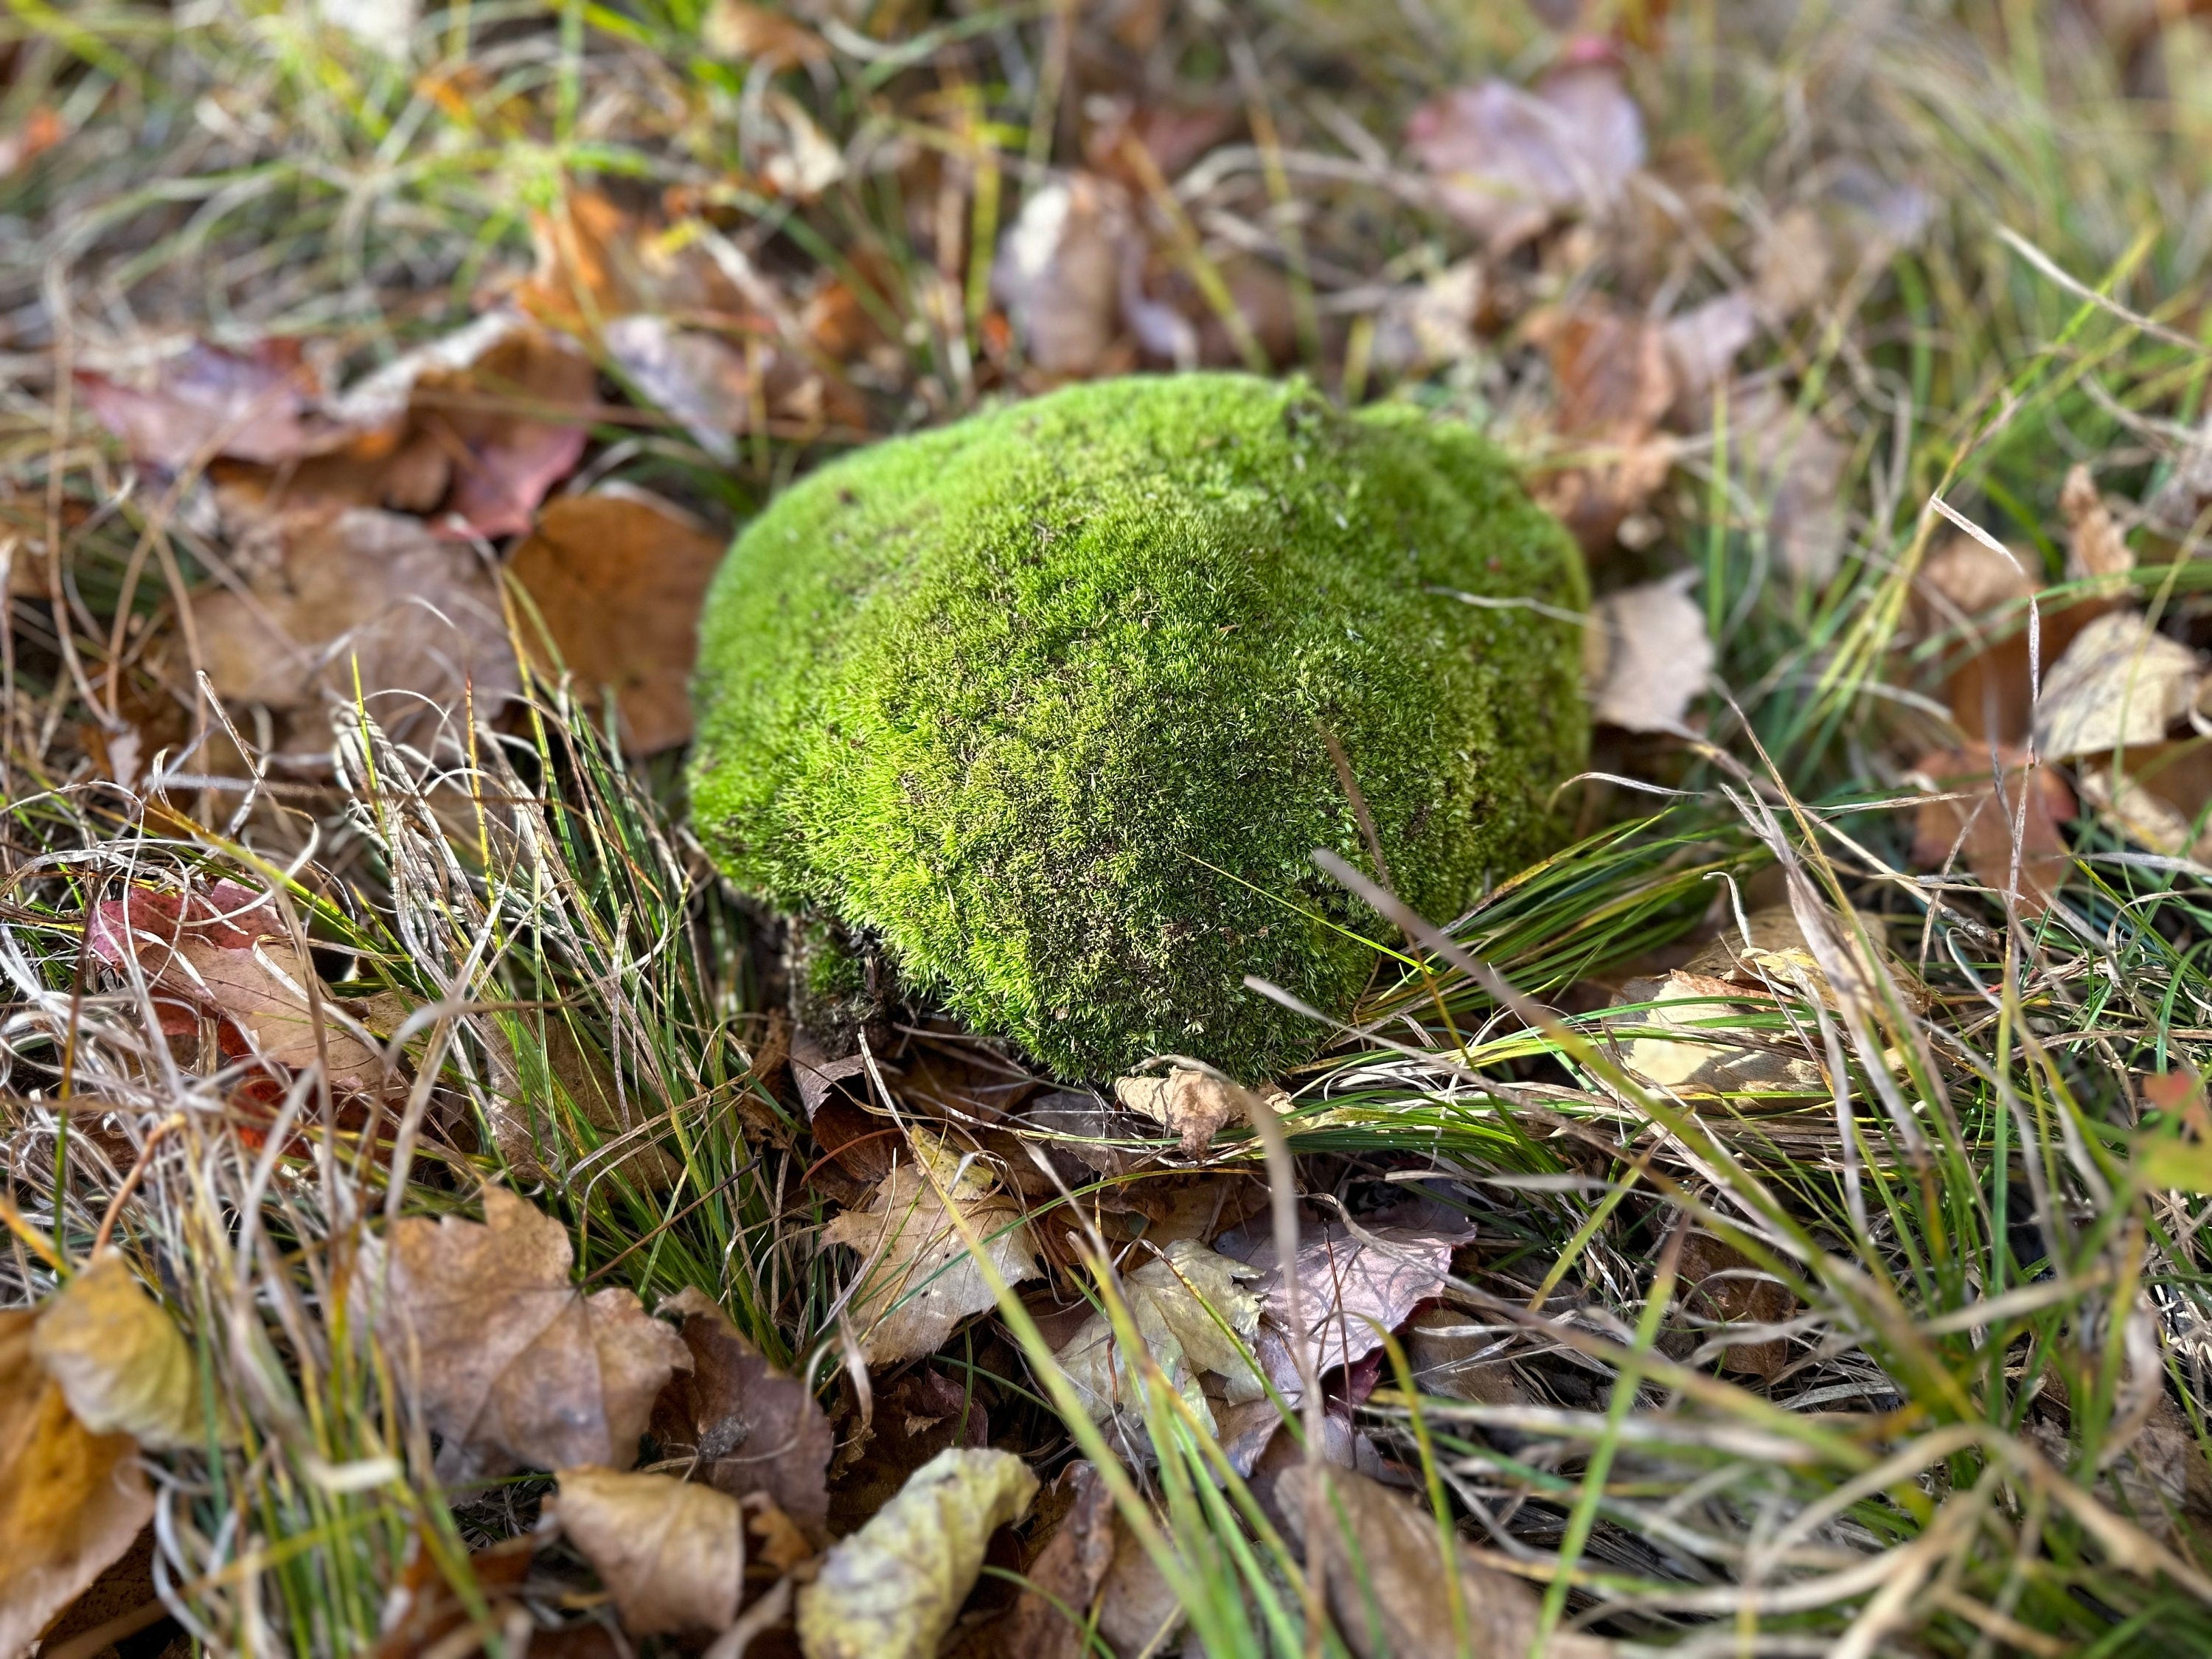 Cushion Moss, Live Green Cushion Moss Approximately 8 Inches Long by 6.5 Inches Wide by 2 Inches High